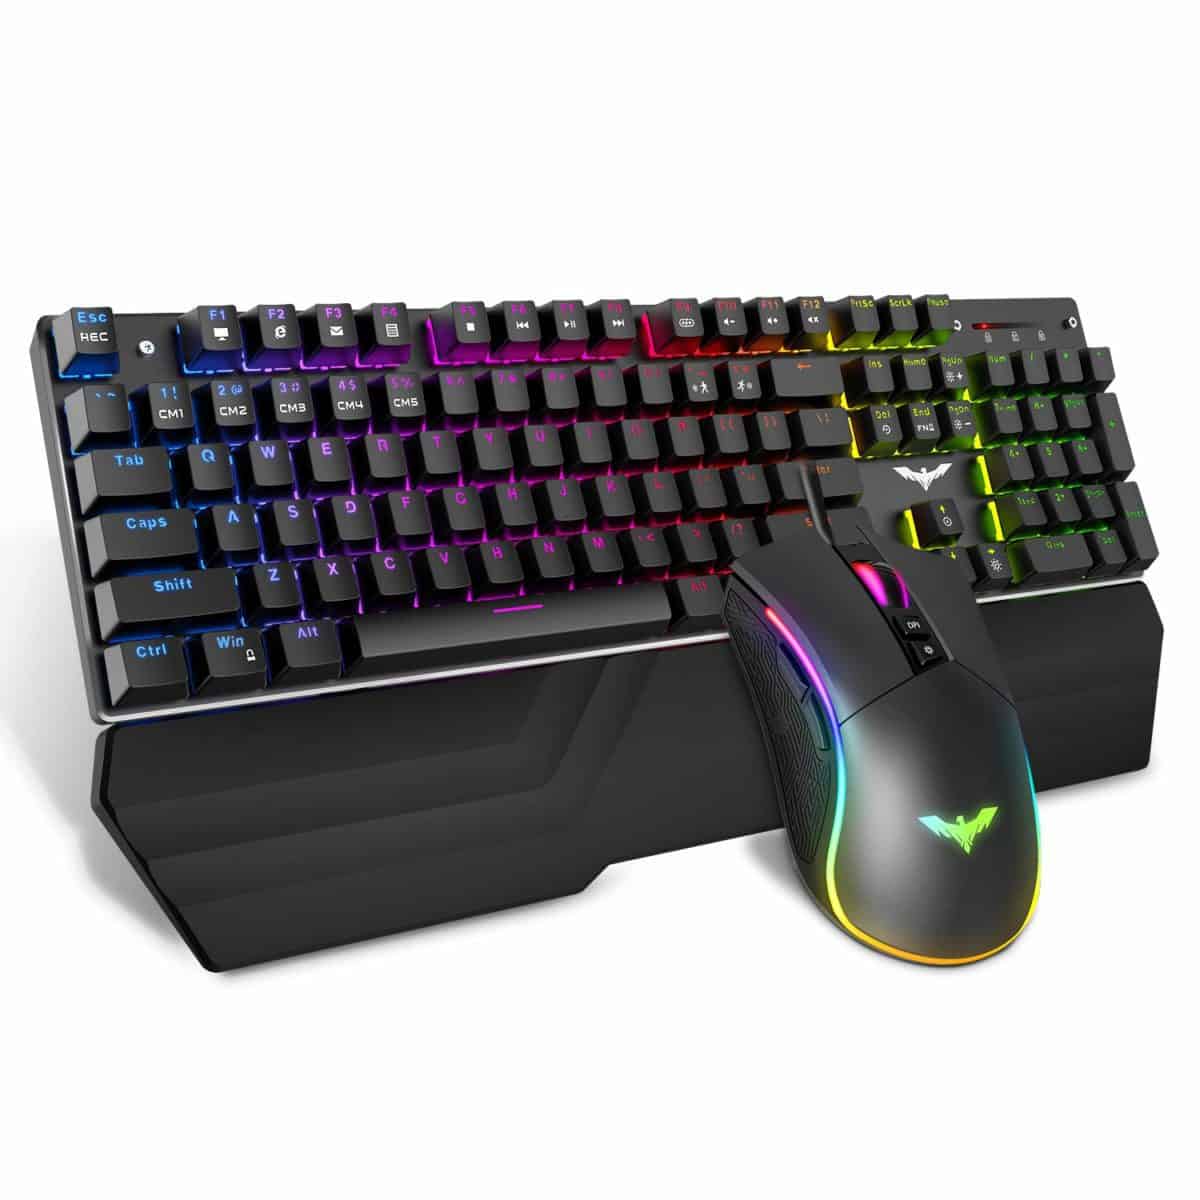 Havit Mechanical keyboard and mouse